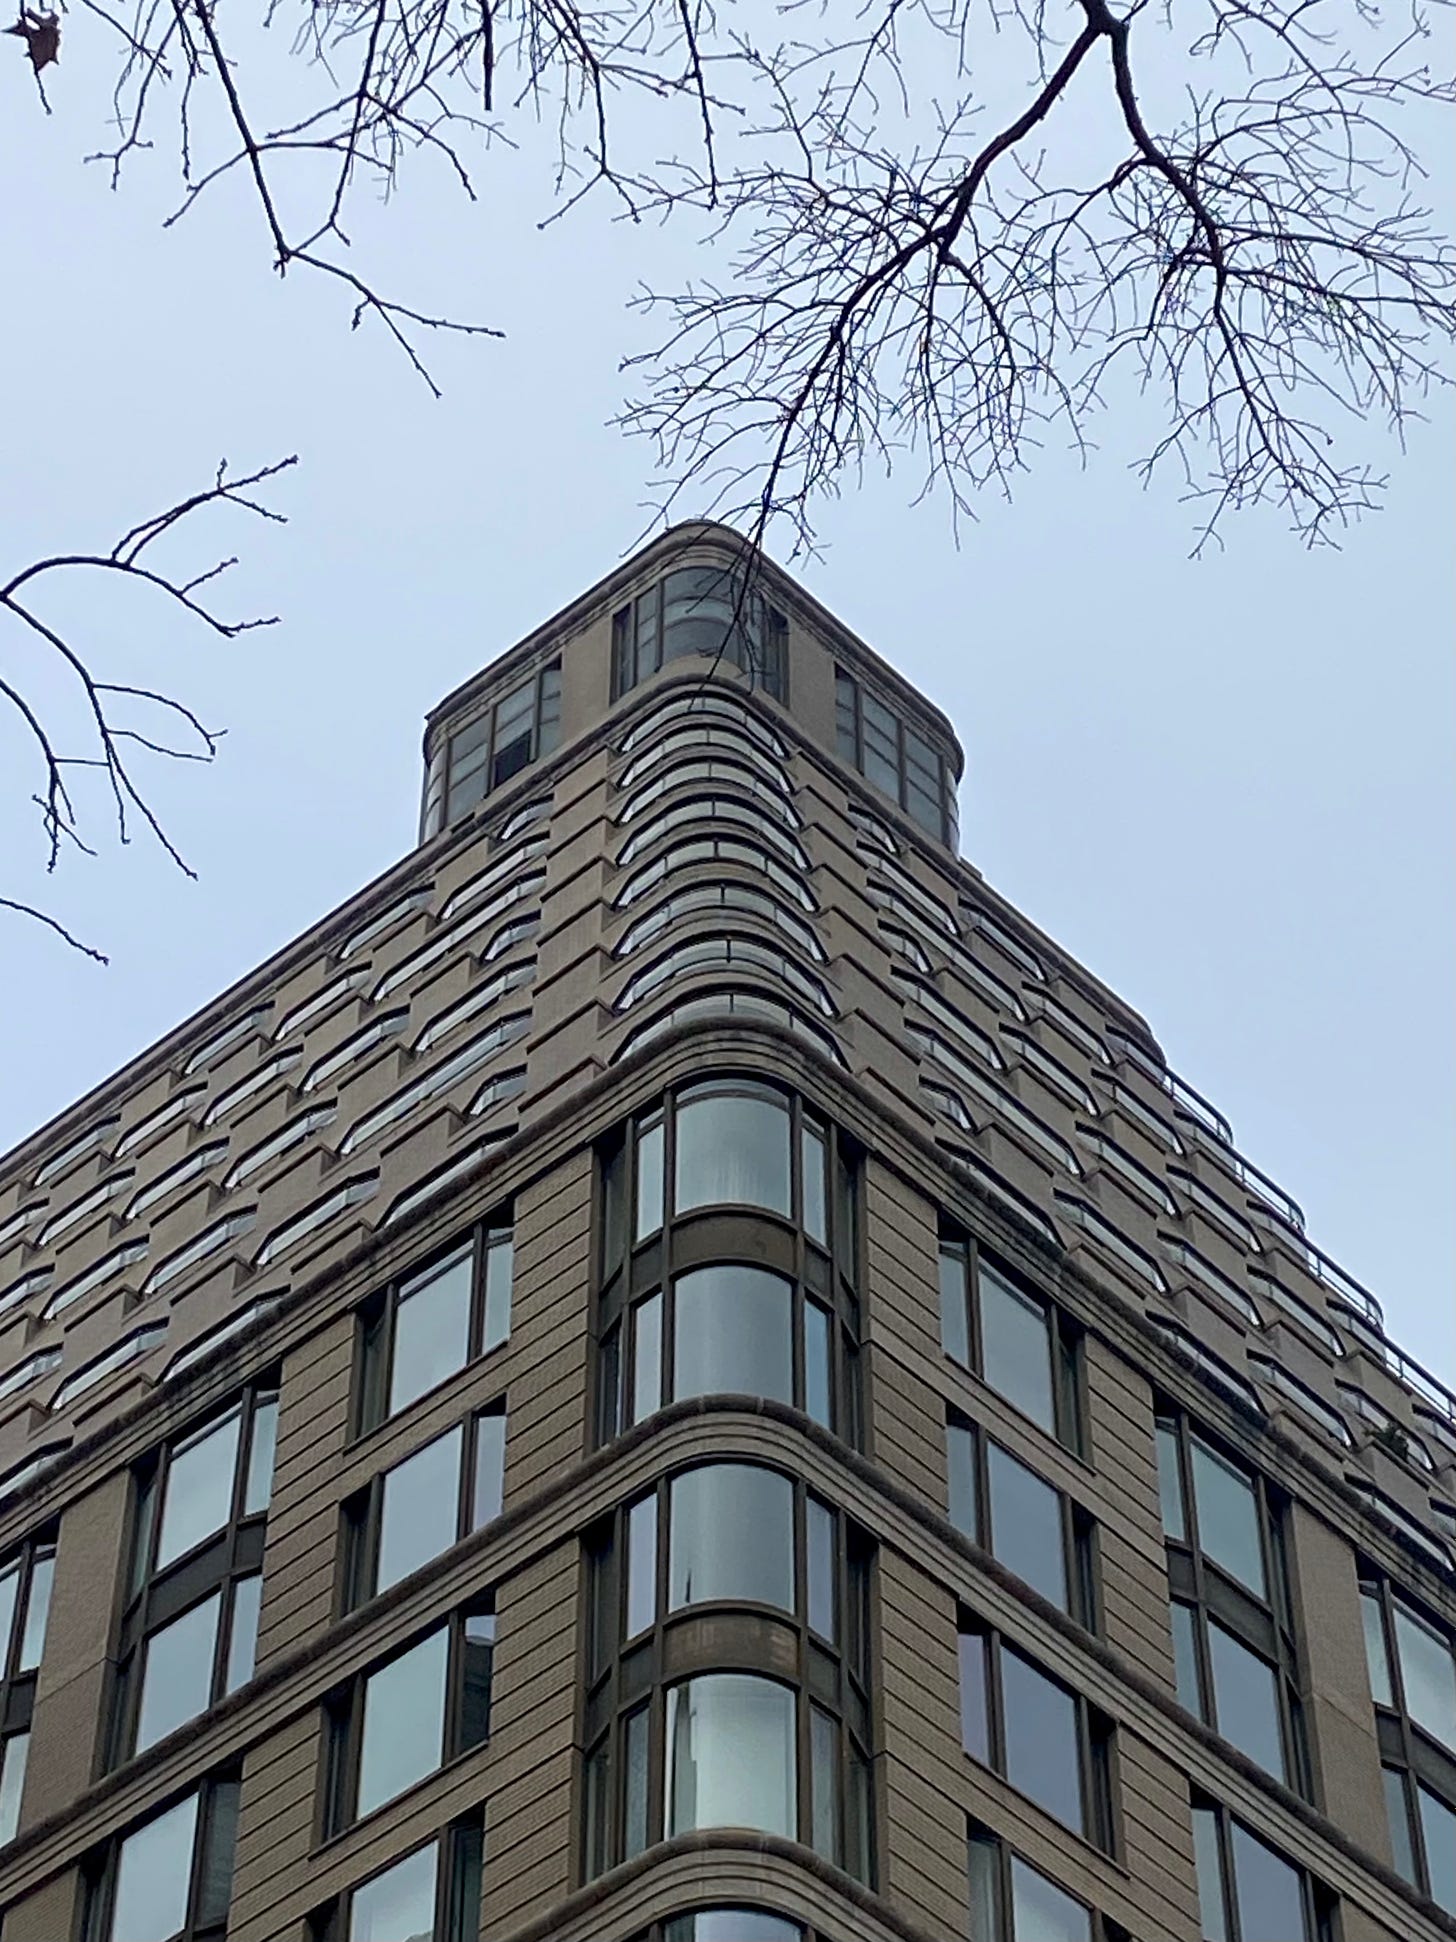 A close-up of the water tower structure that also has matching curved corners.